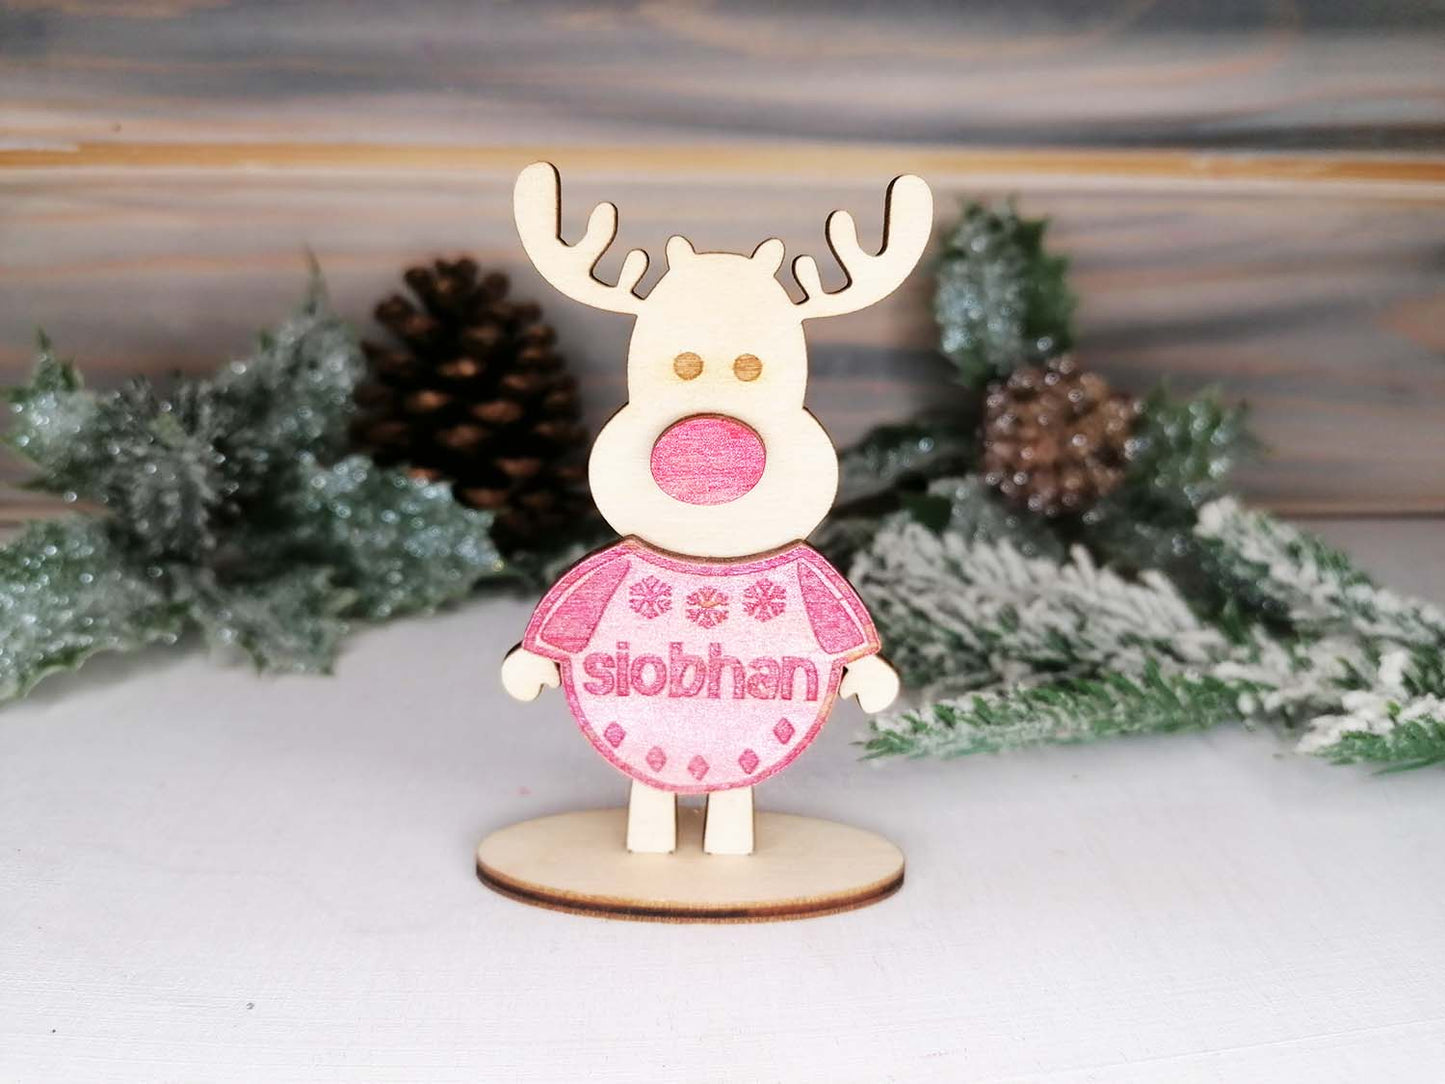 Personalised Rudolph Christmas Decoration